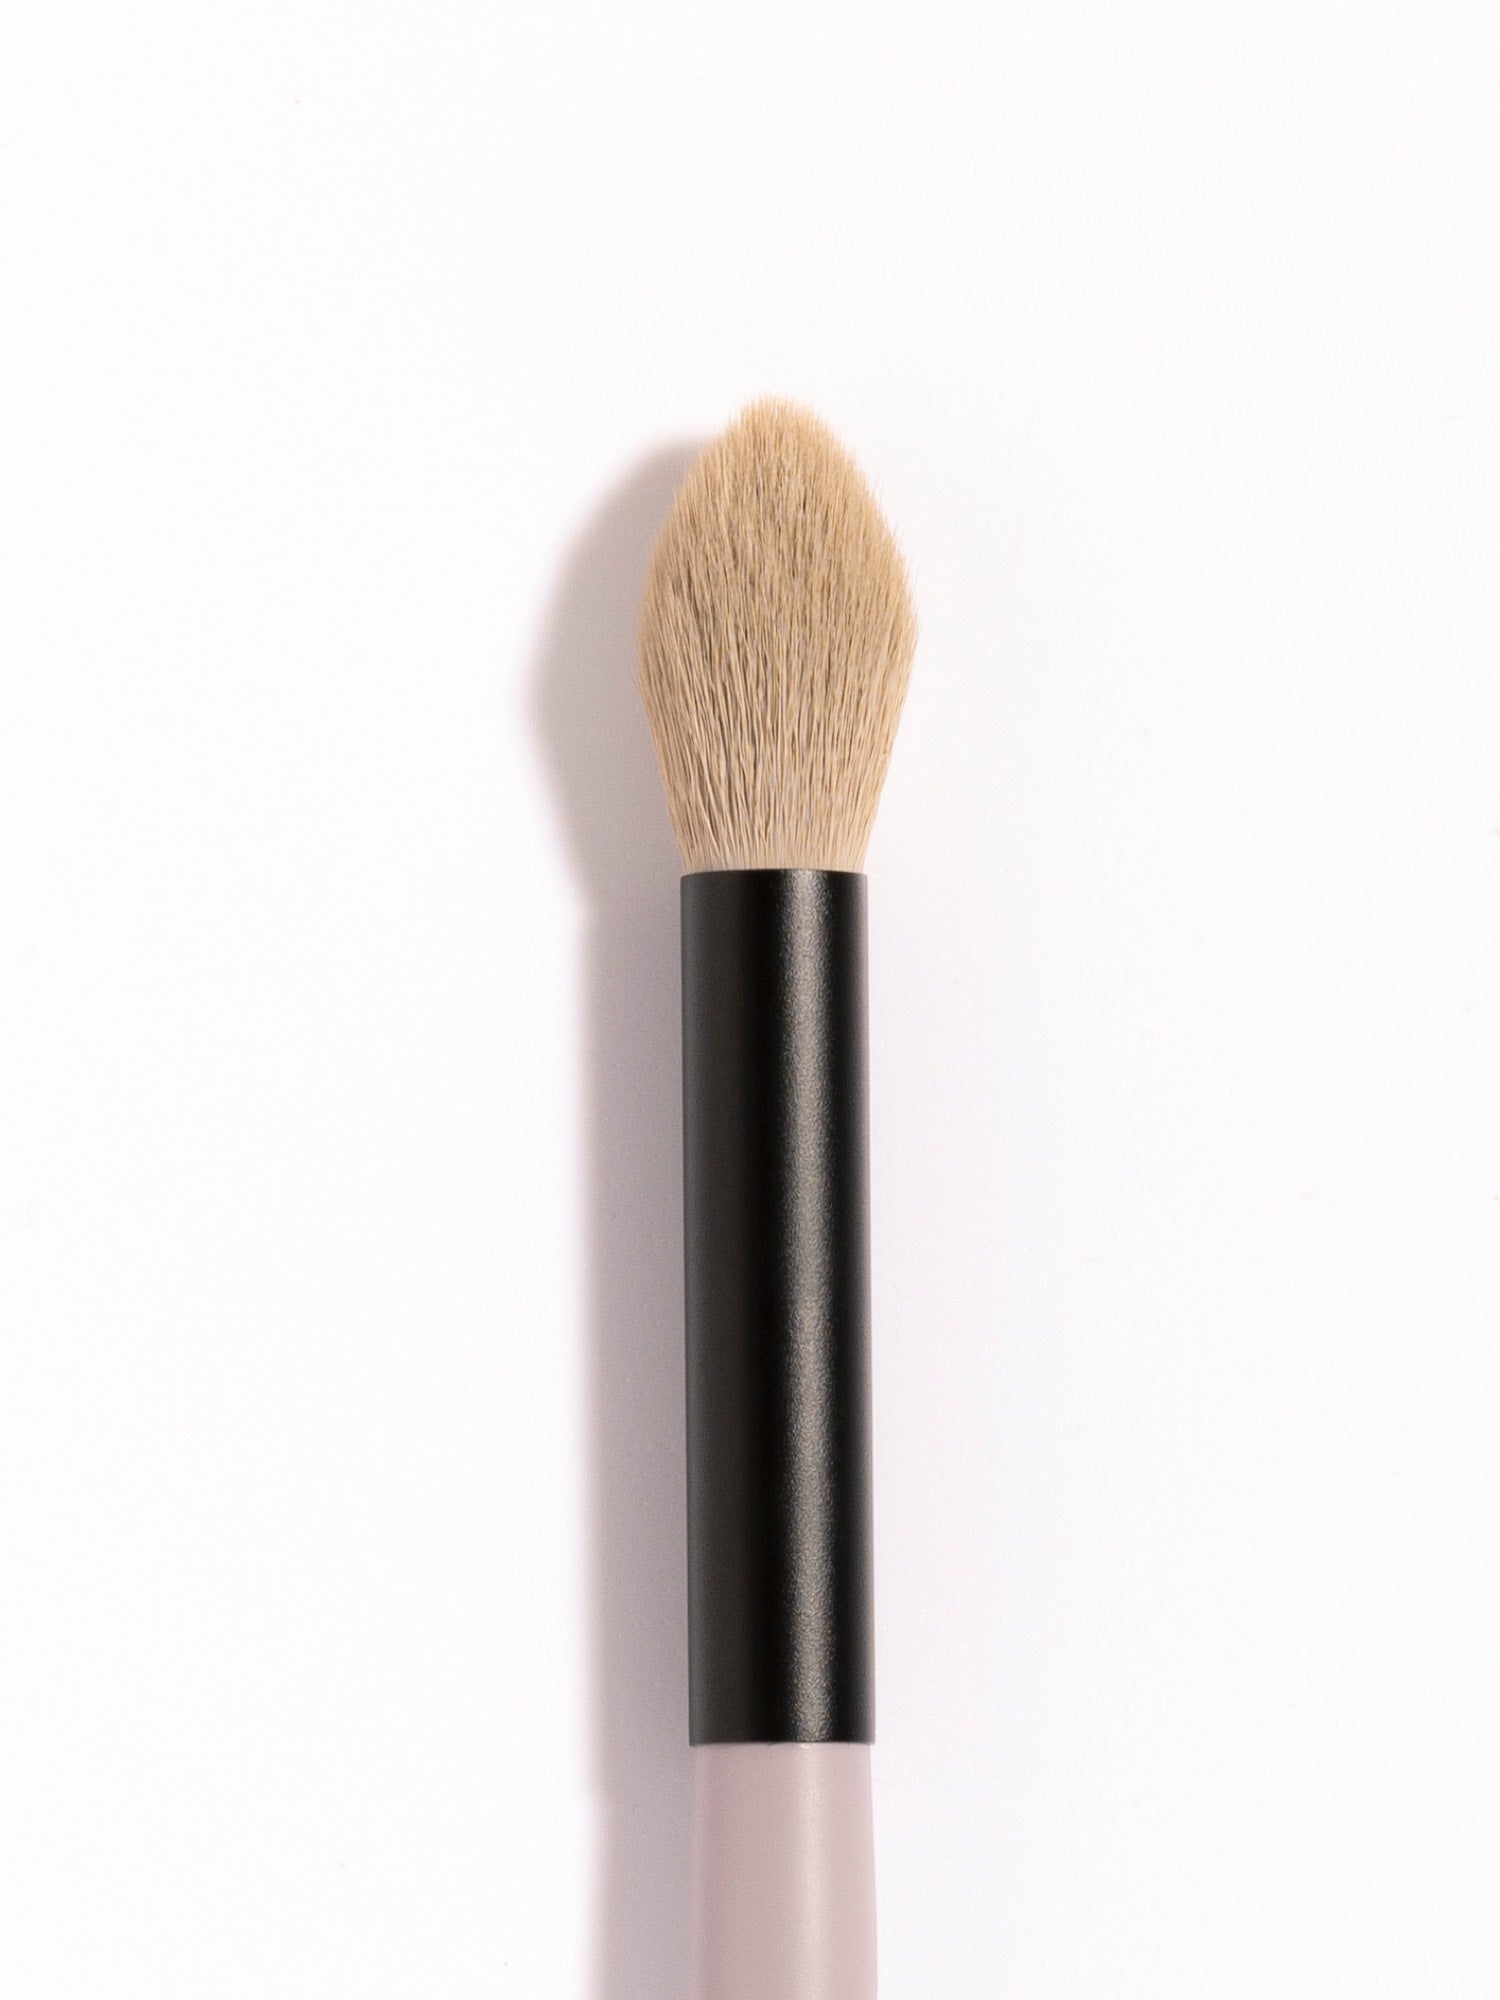 Jo Leversuch Brushes